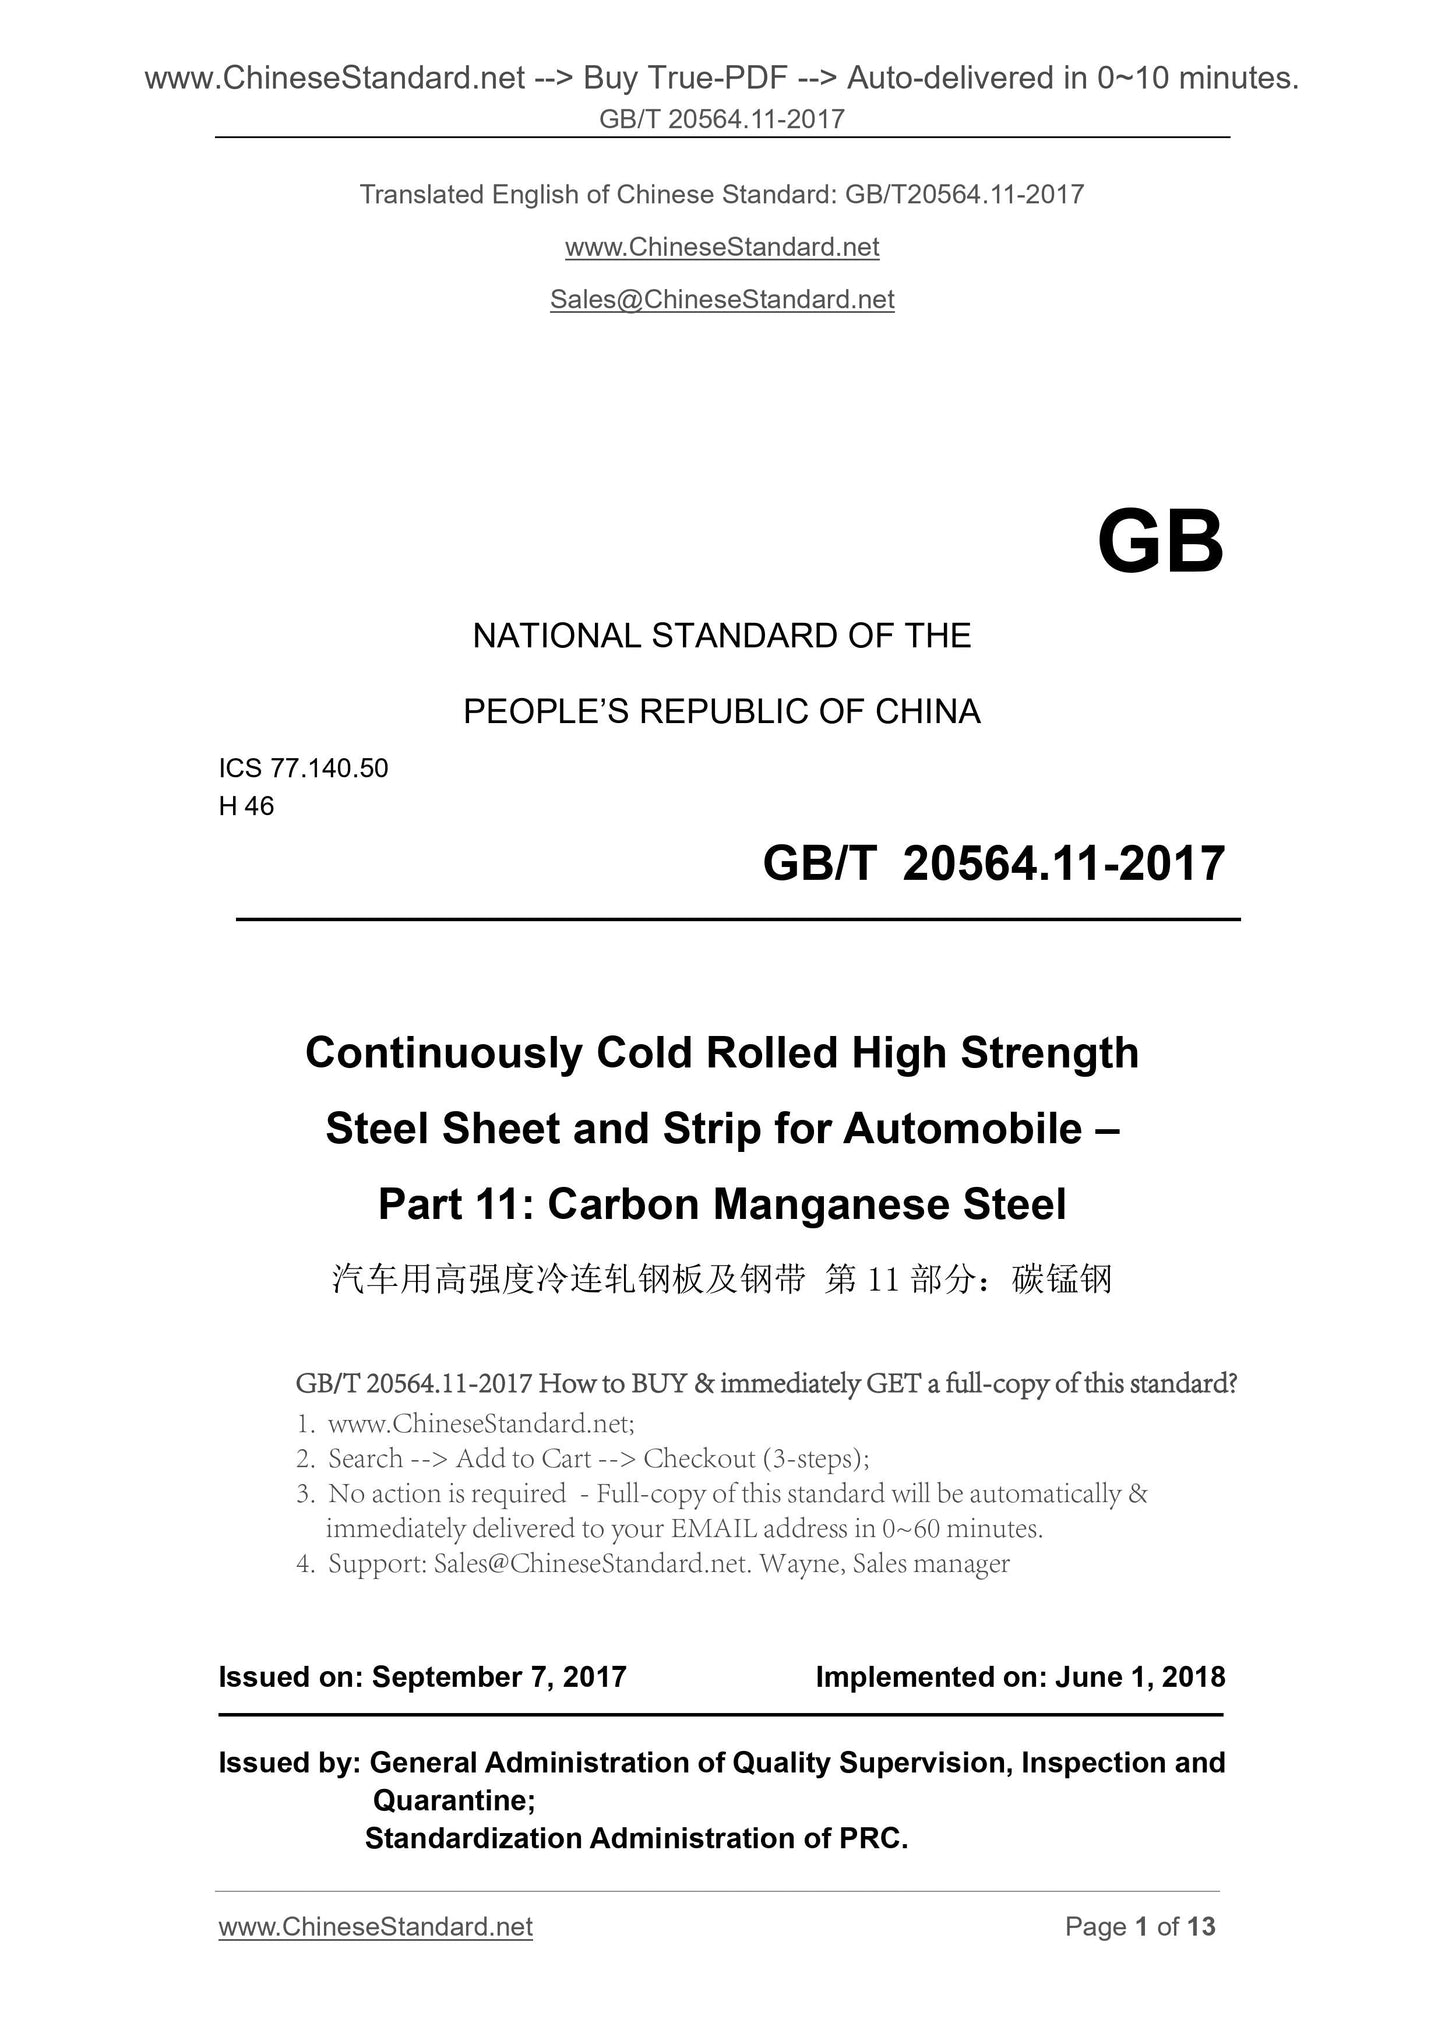 GB/T 20564.11-2017 Page 1